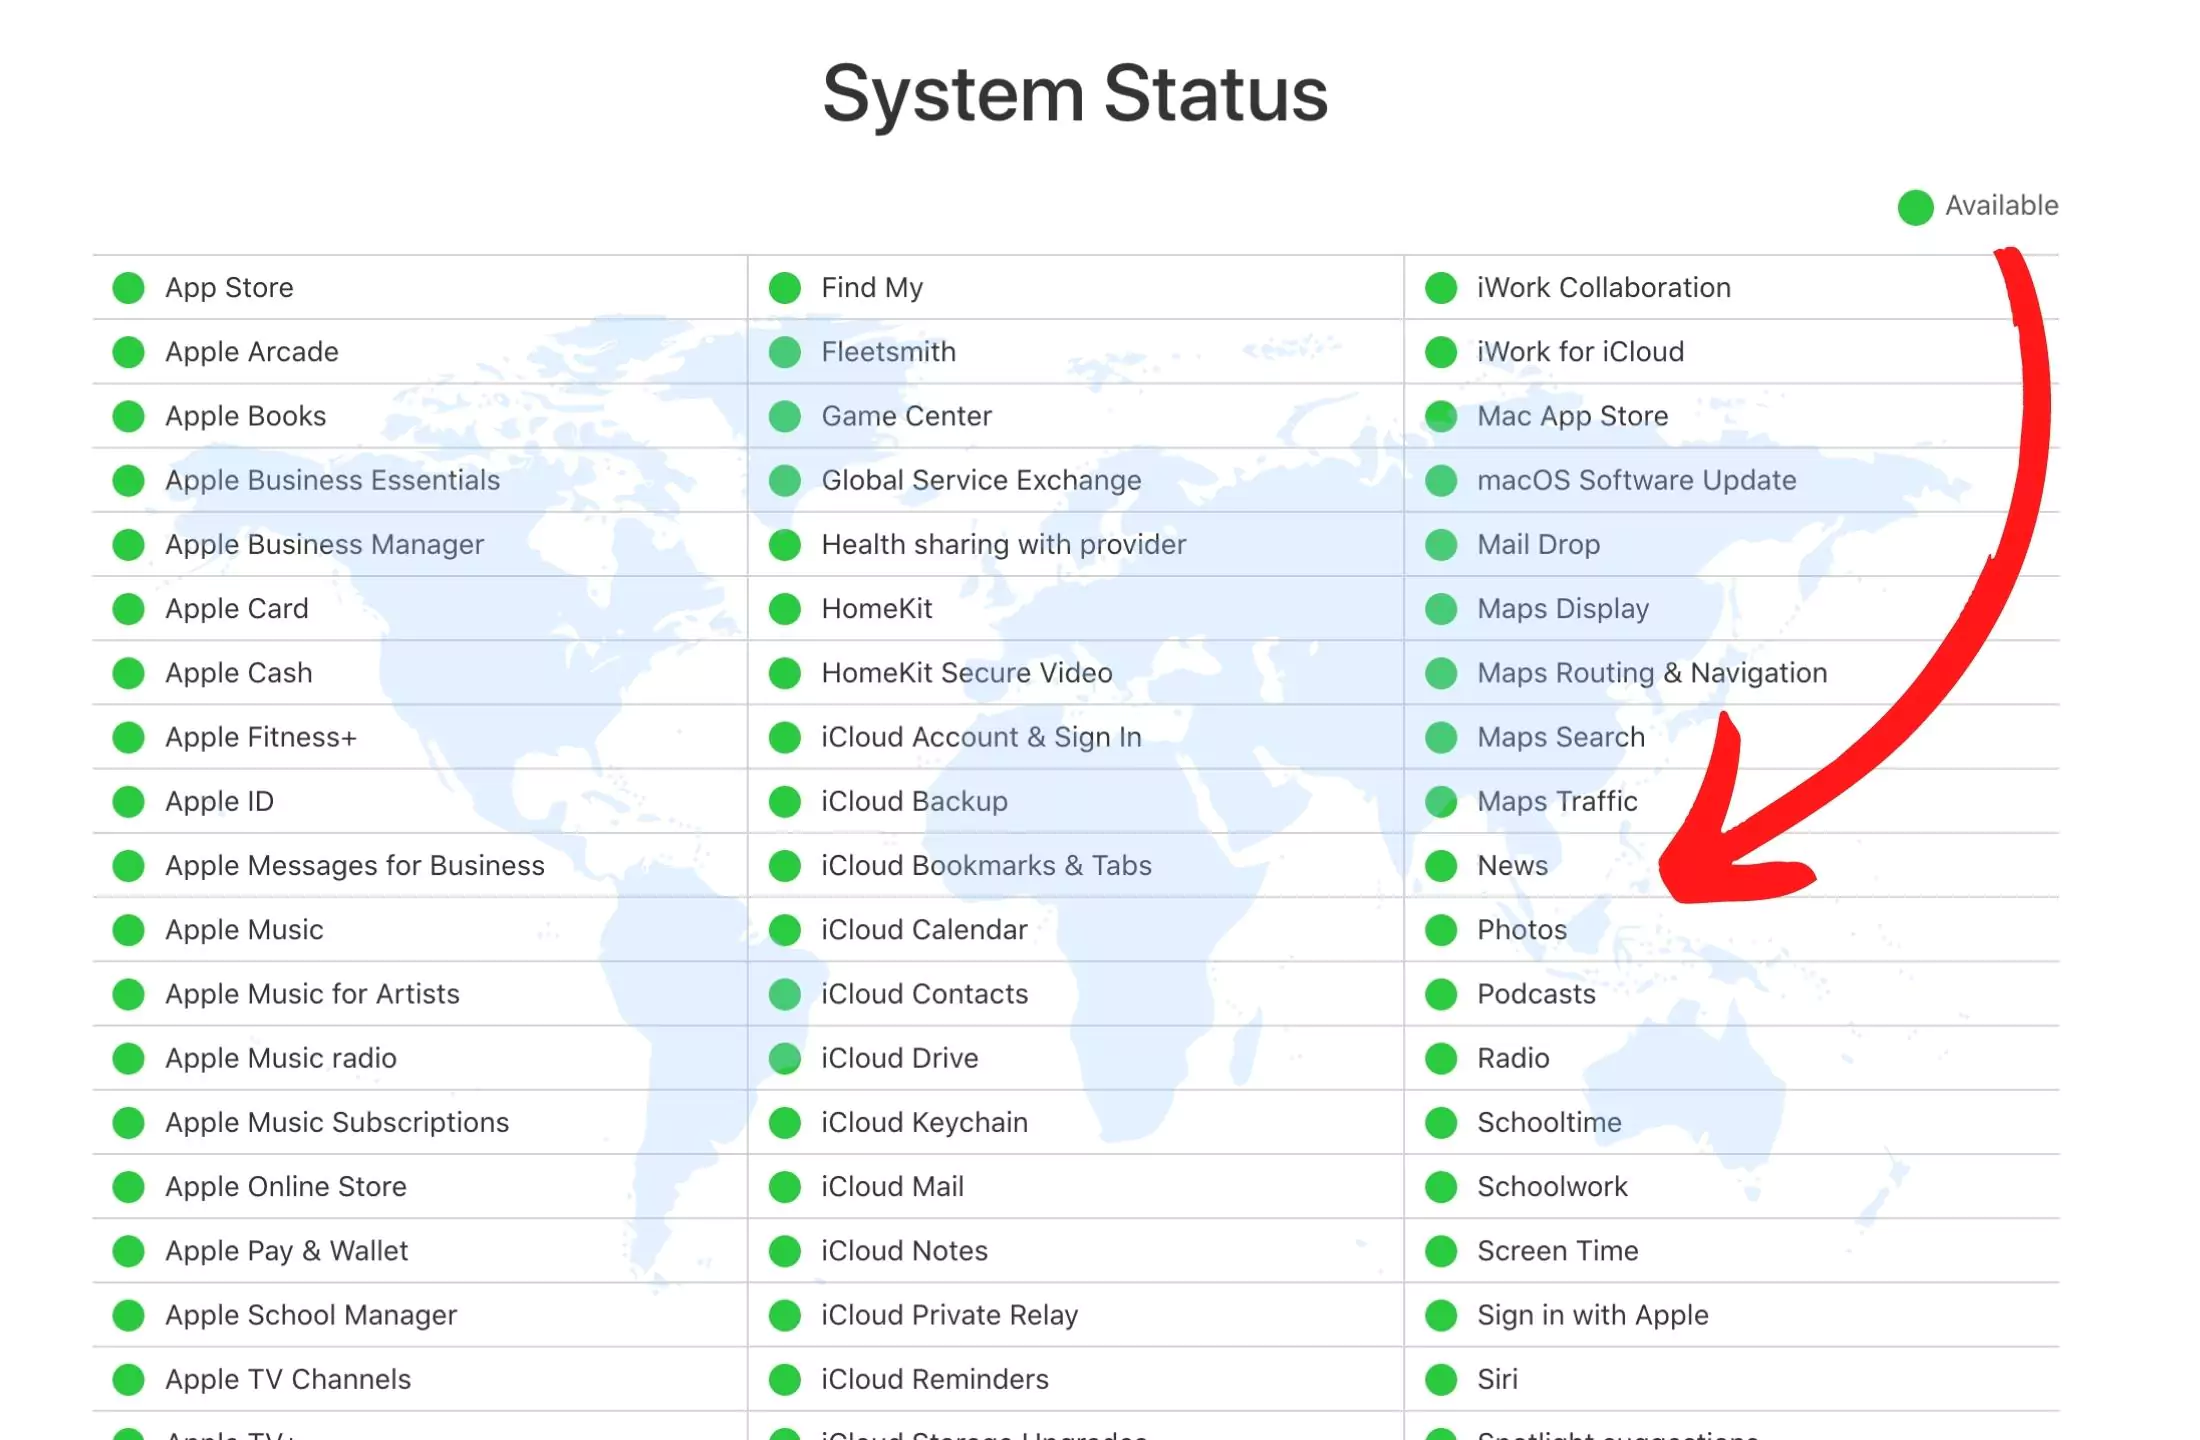 system-status-page-for-news-app-down-check-in-usa-uk-canada-australia